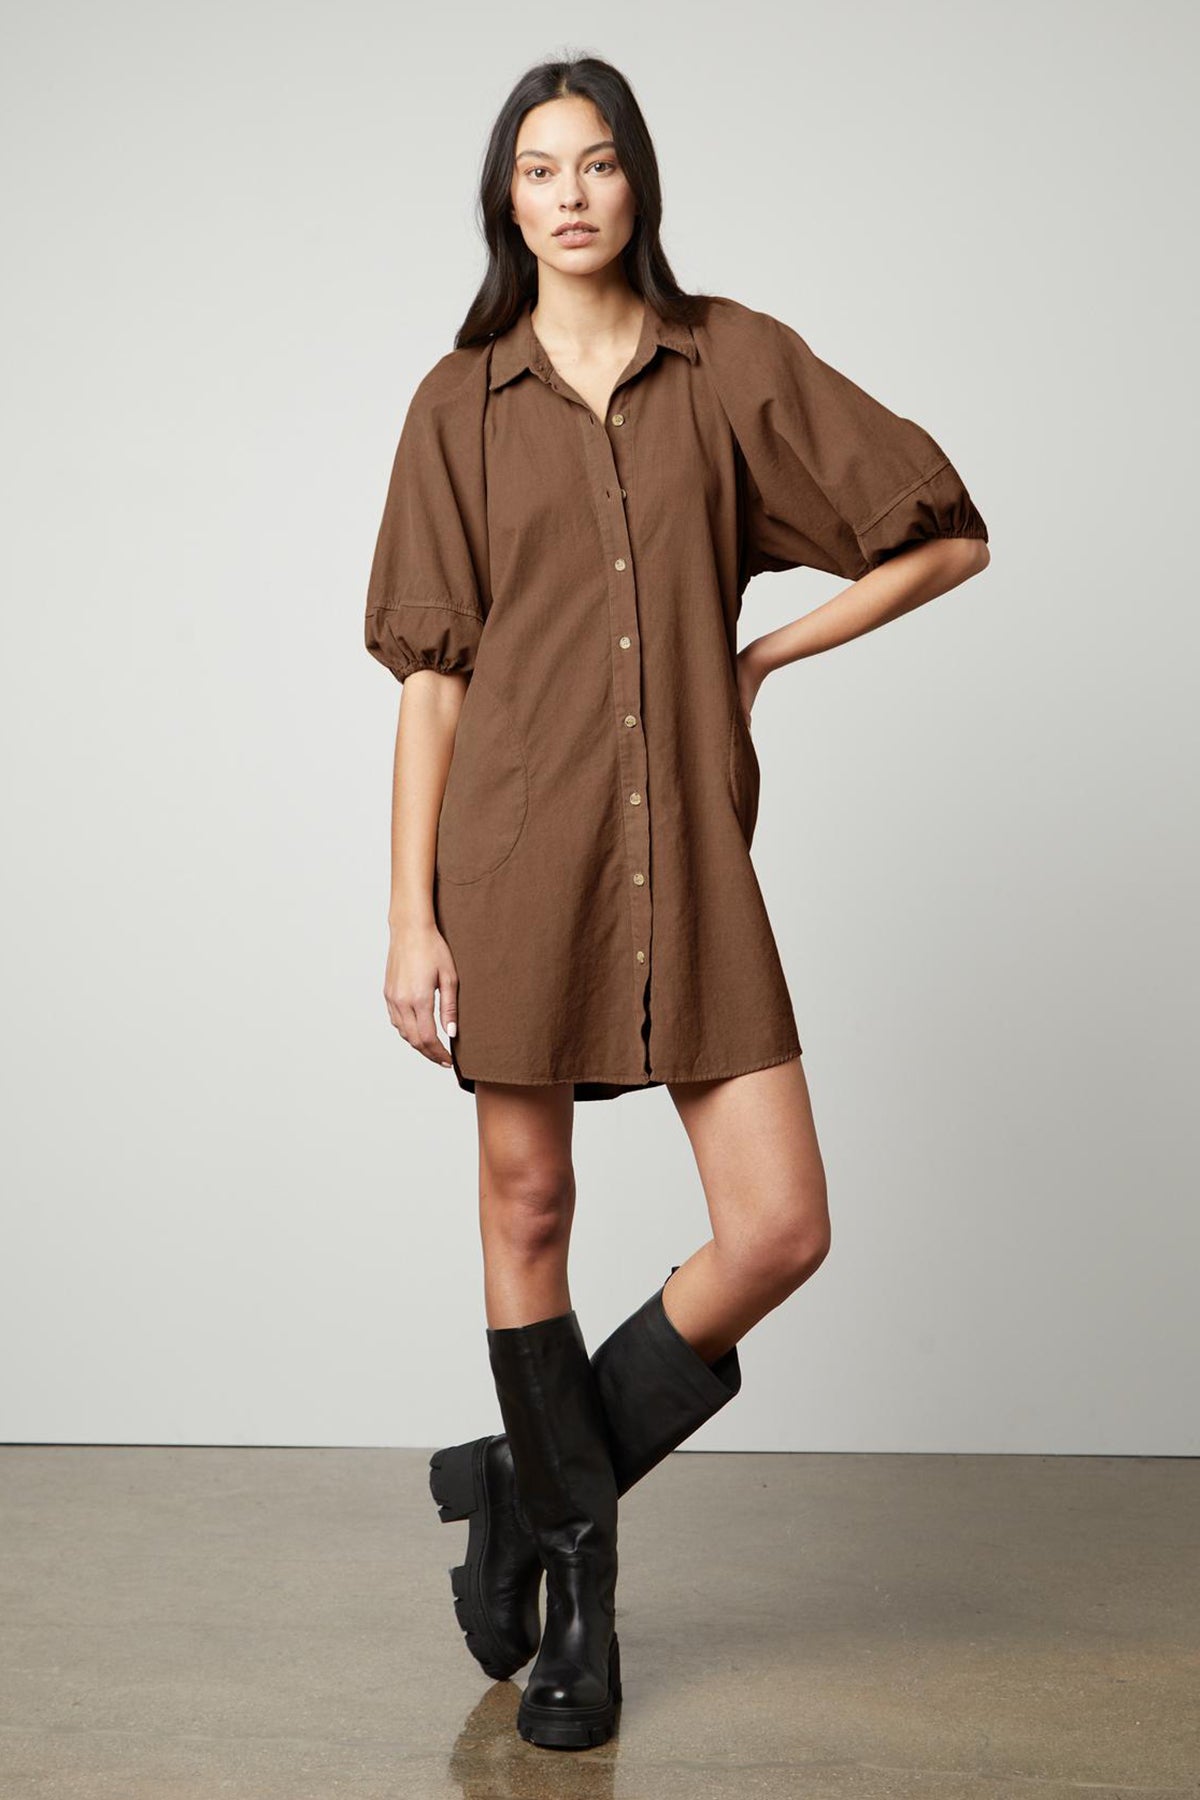 The model is wearing a KADY CORDUROY BUTTON-UP DRESS by Velvet by Graham & Spencer and black boots.-26727742275777